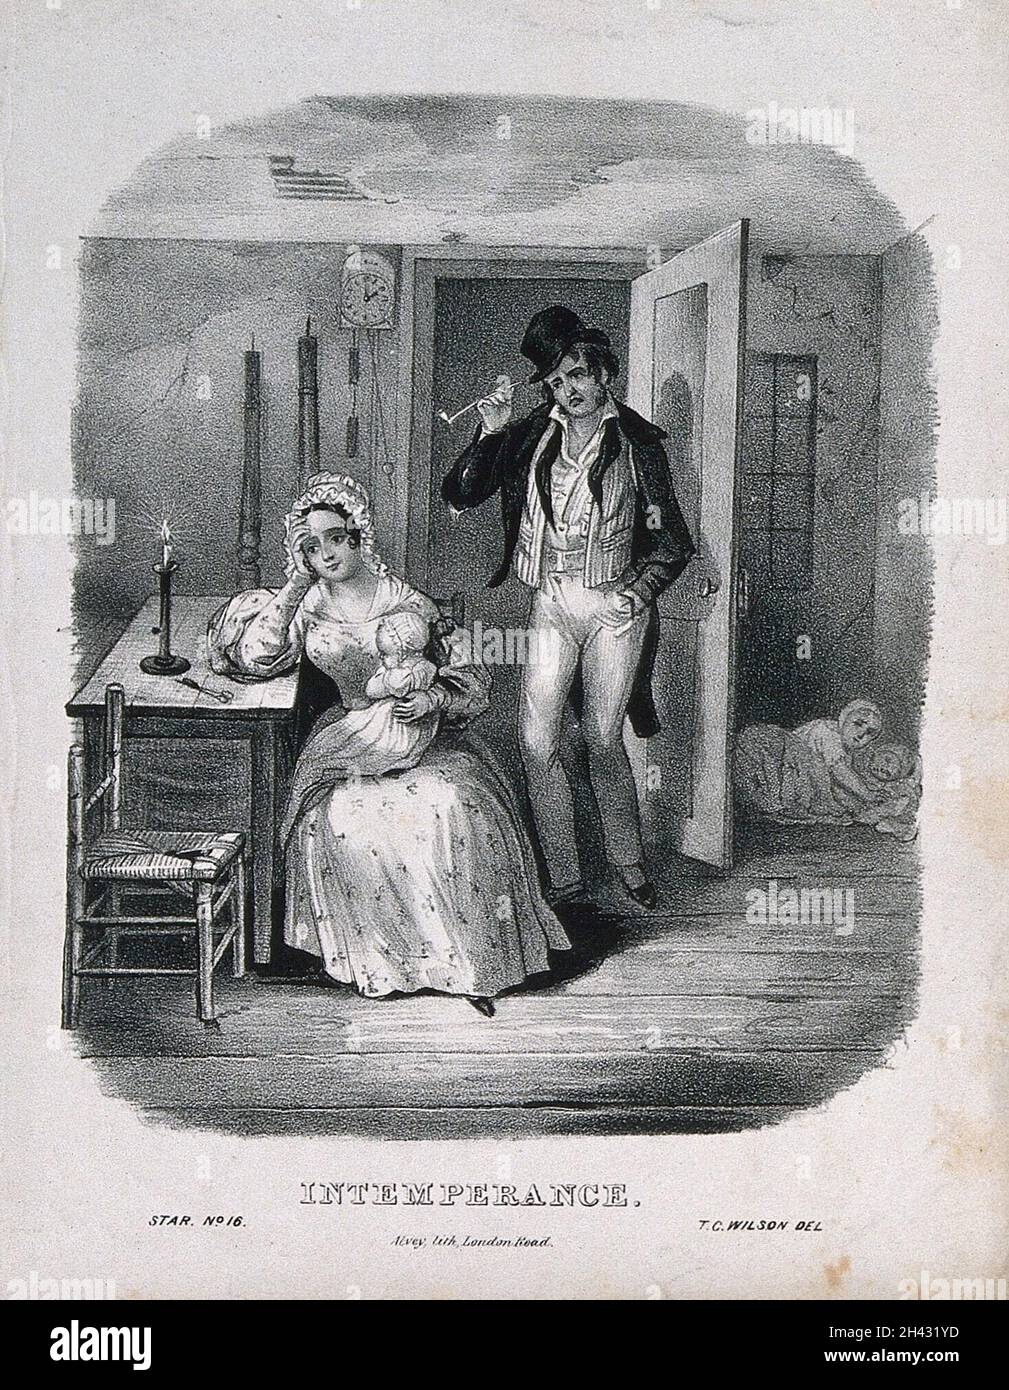 The evil effects of intemperance on a man and his family. Lithograph by Alvey, c. 1840, after T.C. Wilson. Stock Photo